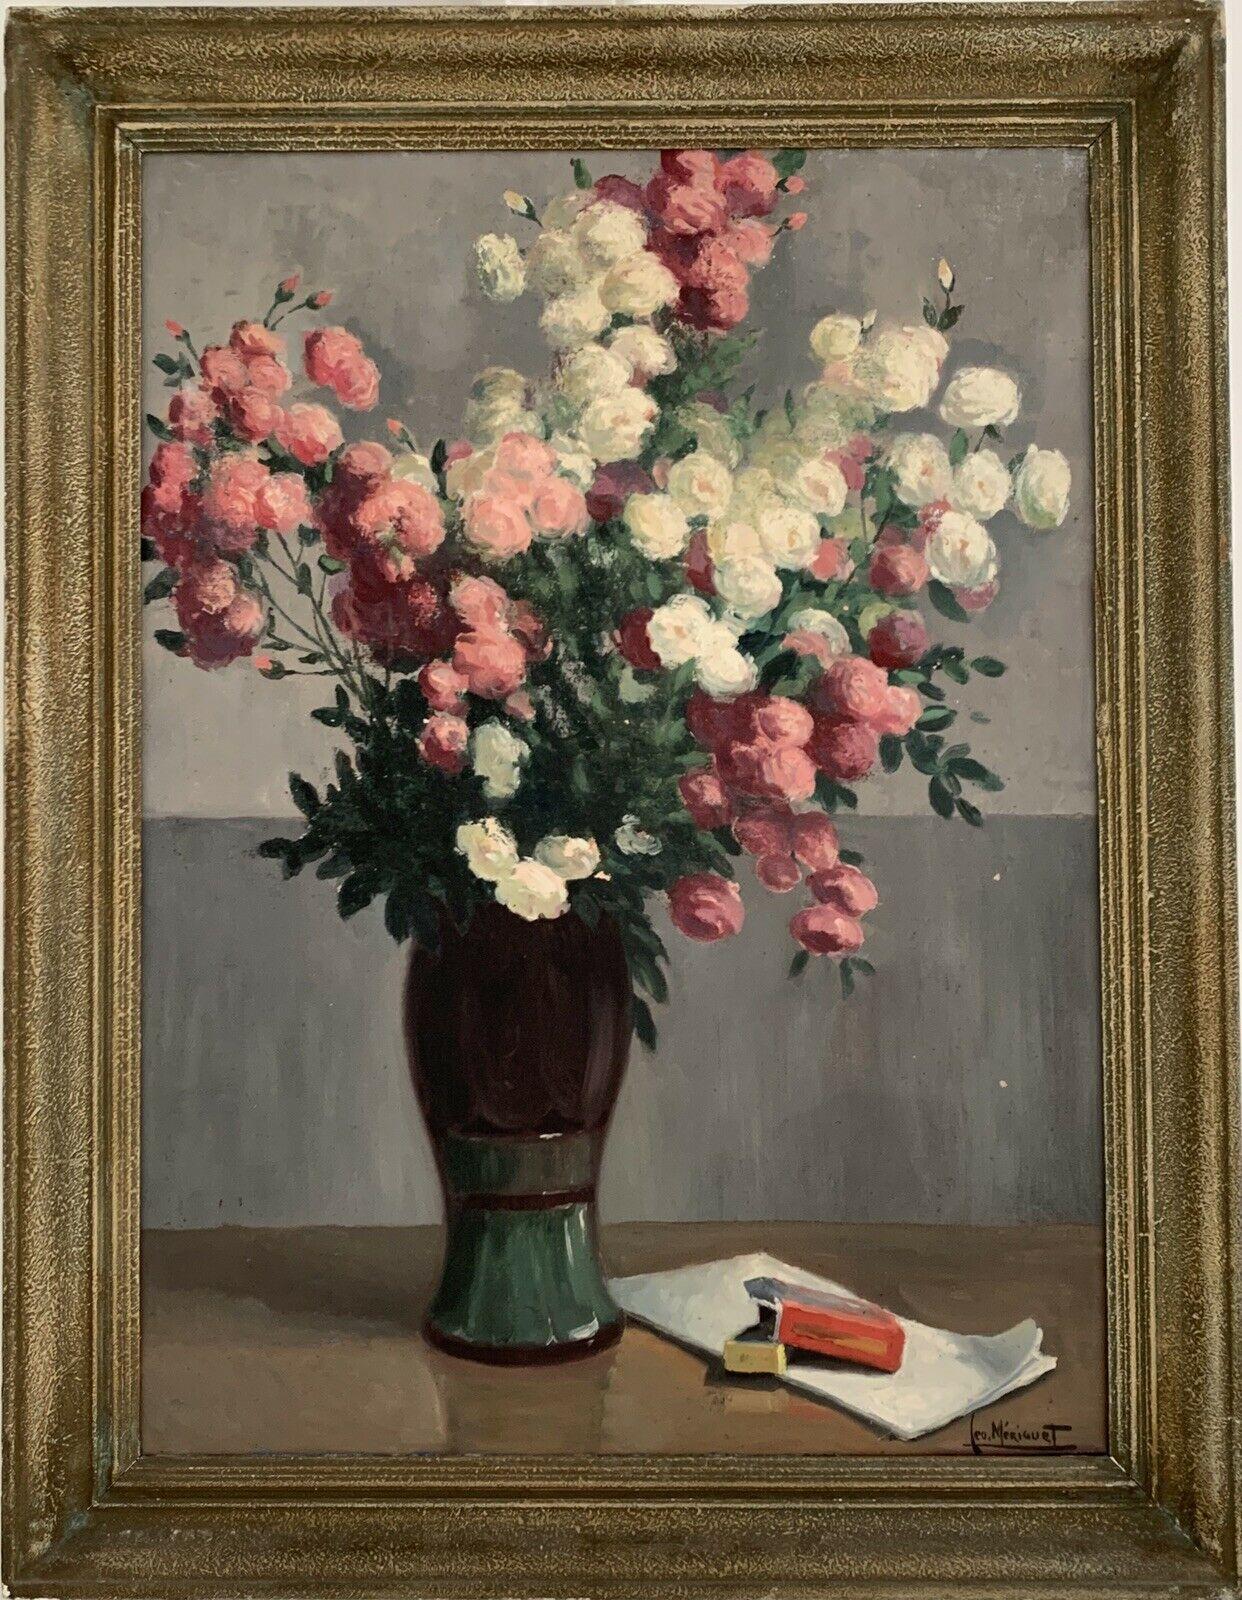 George Meriquet Still-Life Painting - SIGNED FRENCH 1950'S IMPRESSIONIST SIGNED OIL - ABUNDANT FULL BLOOM FLOWERS